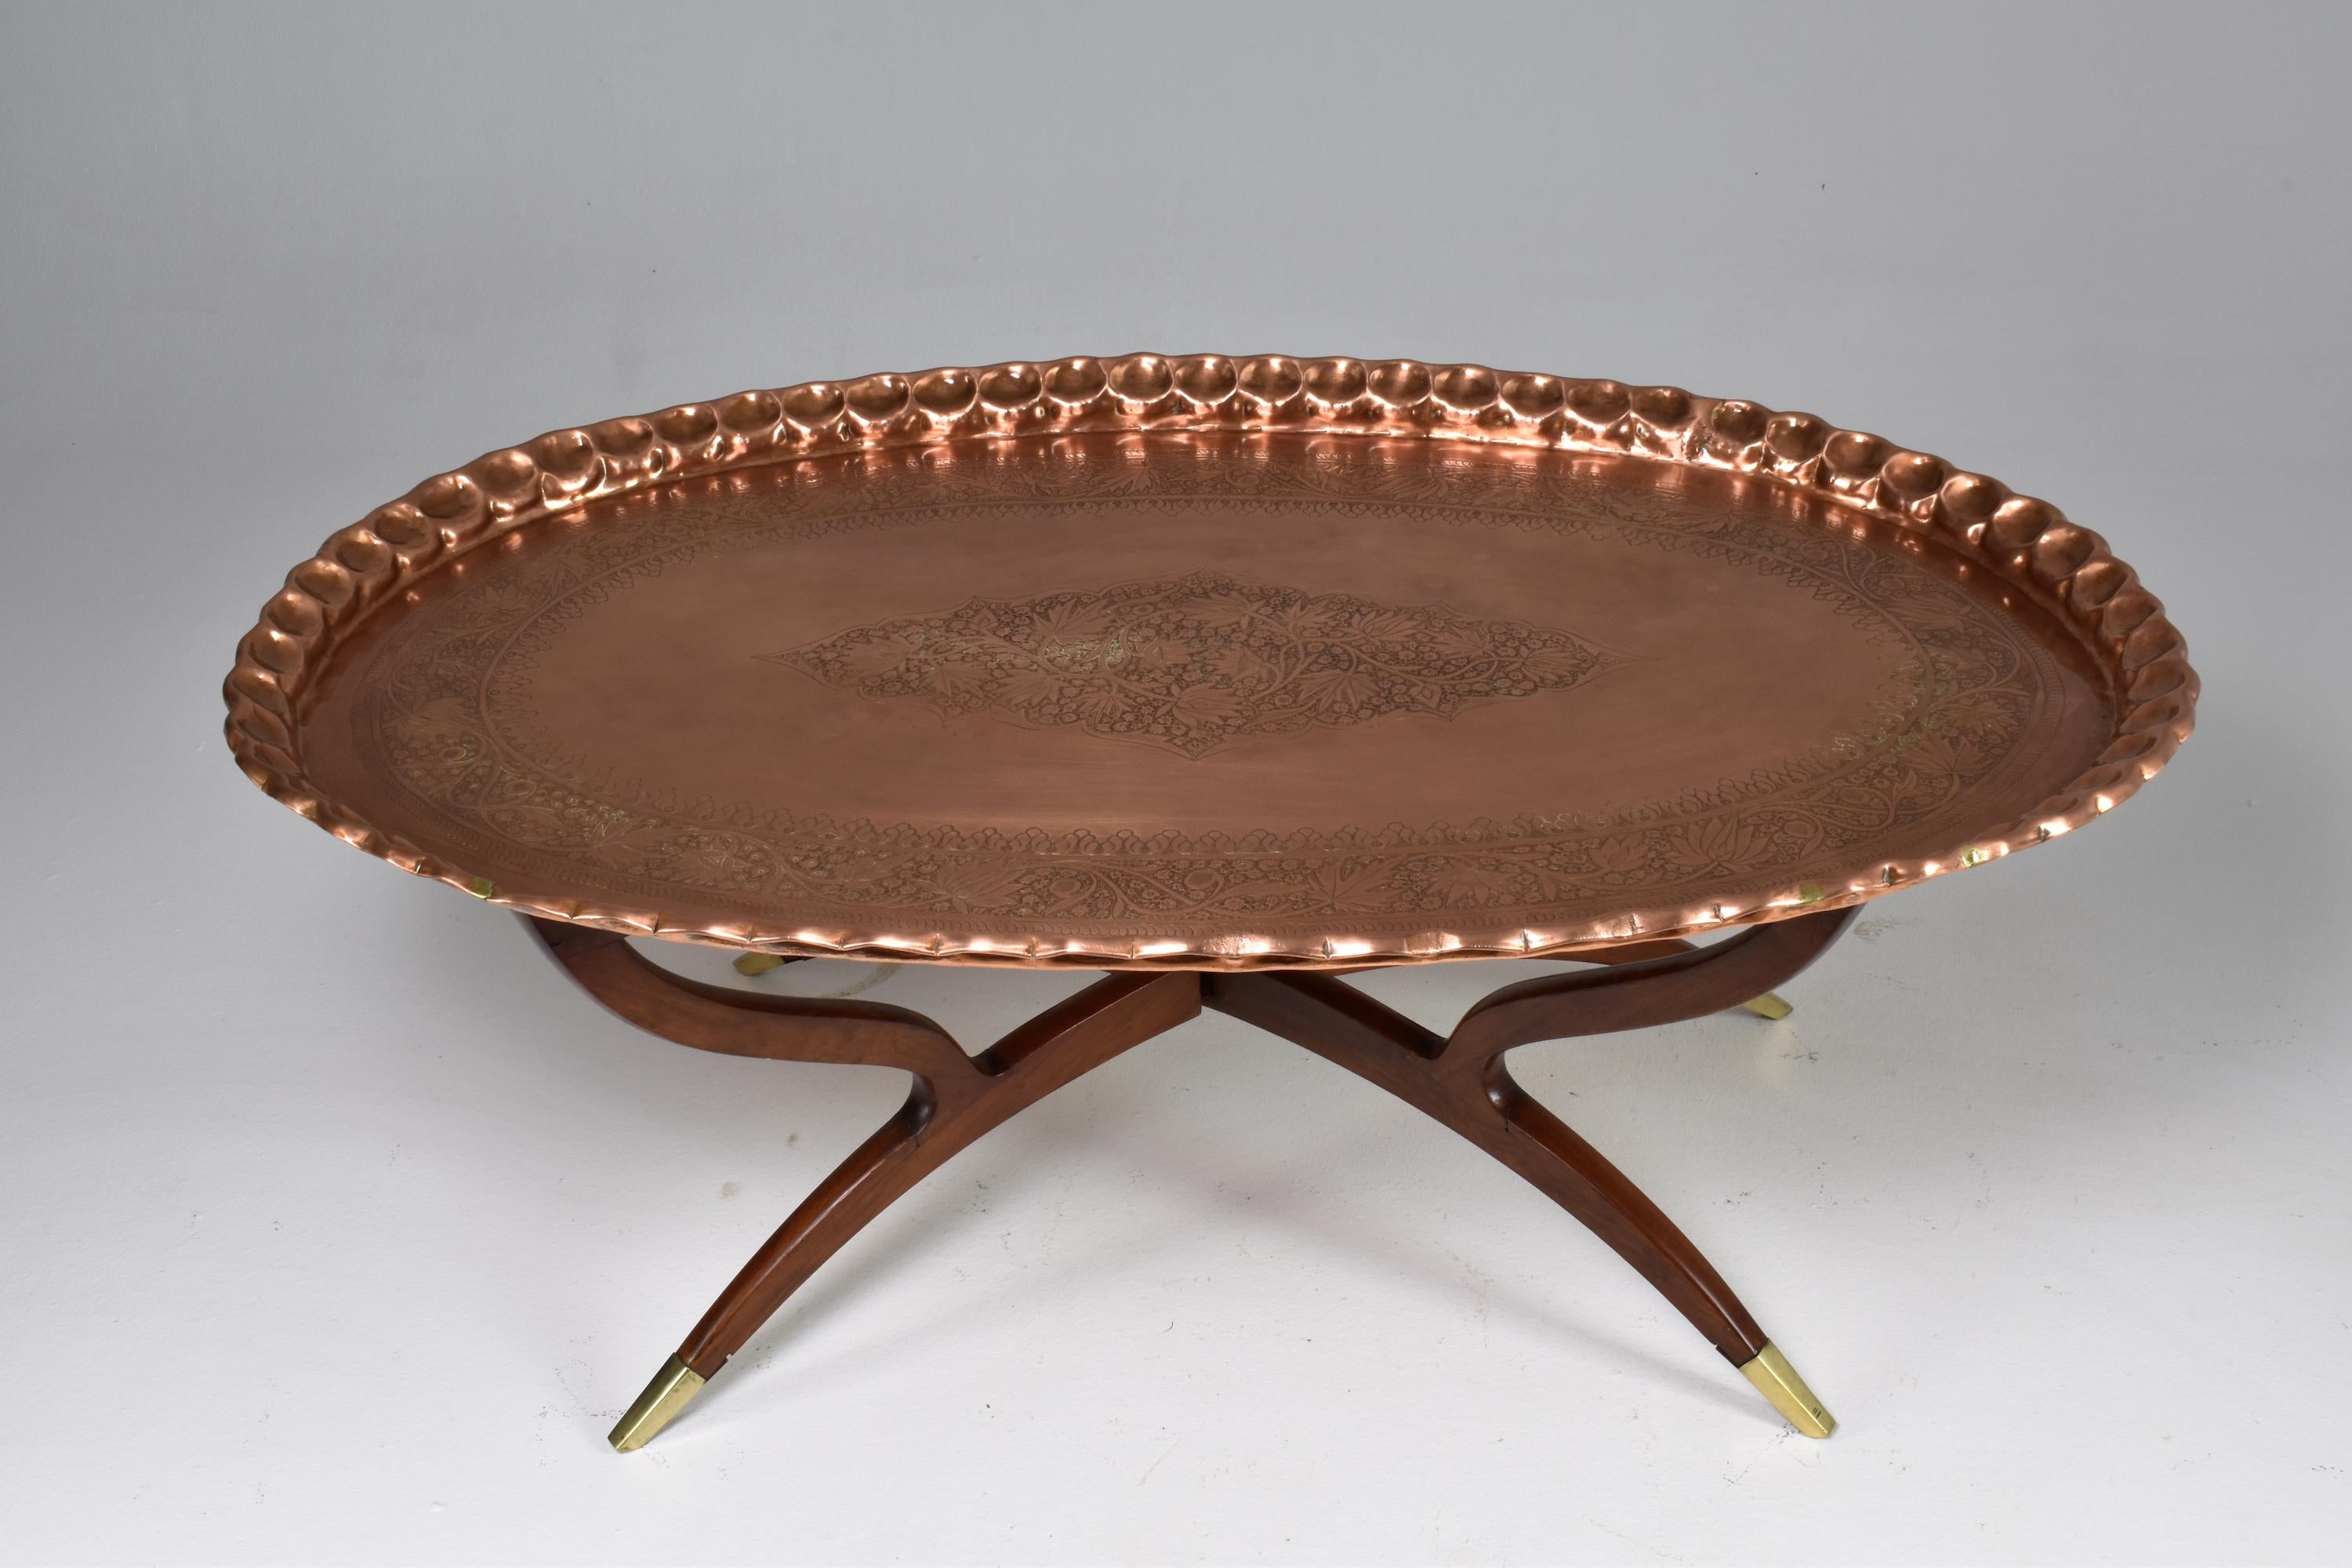 A fantastic 20th mid-century vintage Moorish oval-shaped coffee table composed of a removable meticulously sculpted and hand-engraved copper tabletop and a sculpted foldable wooden base with beautiful brass endings. A great work of Moroccan